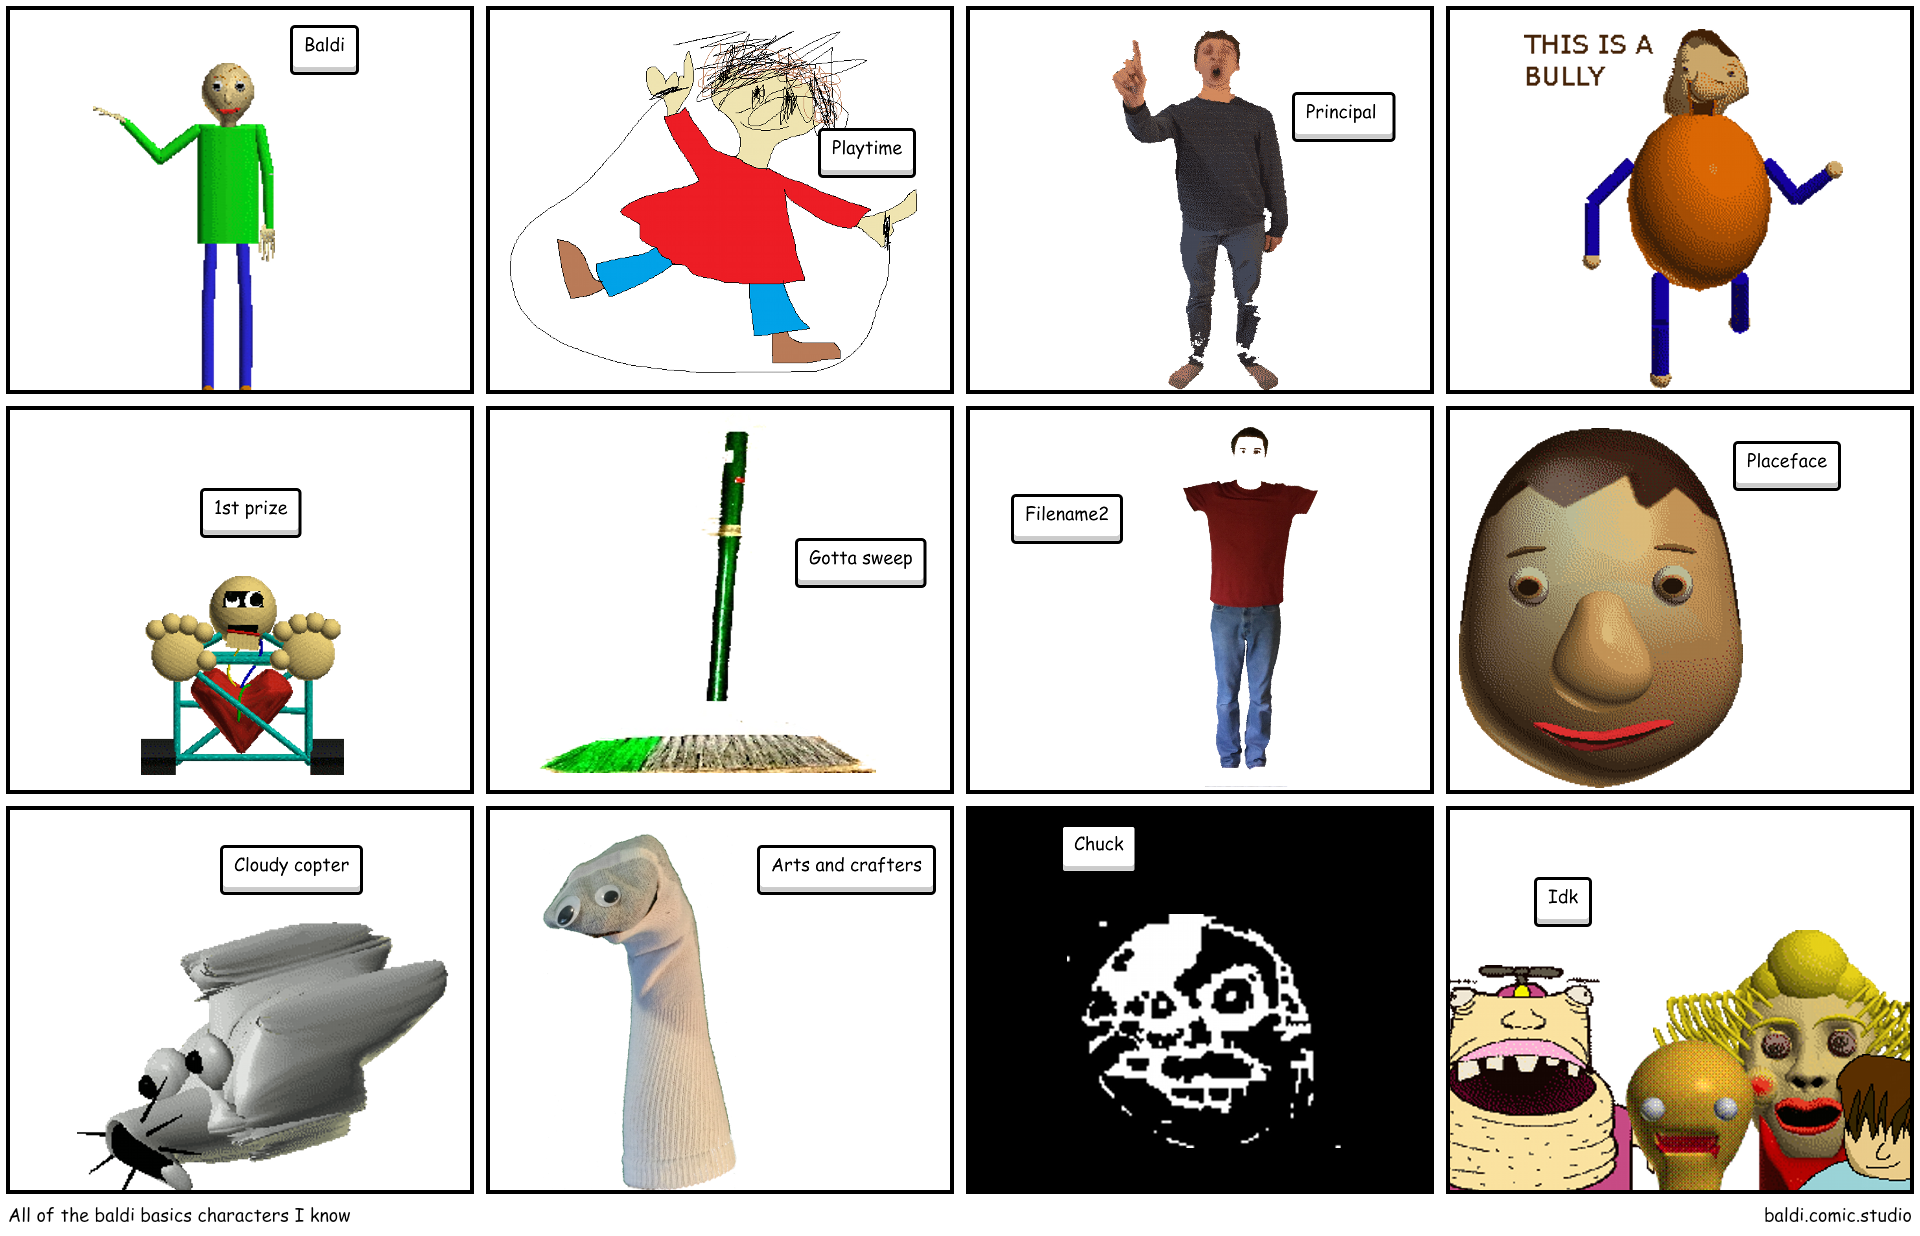 All of the baldi basics characters I know